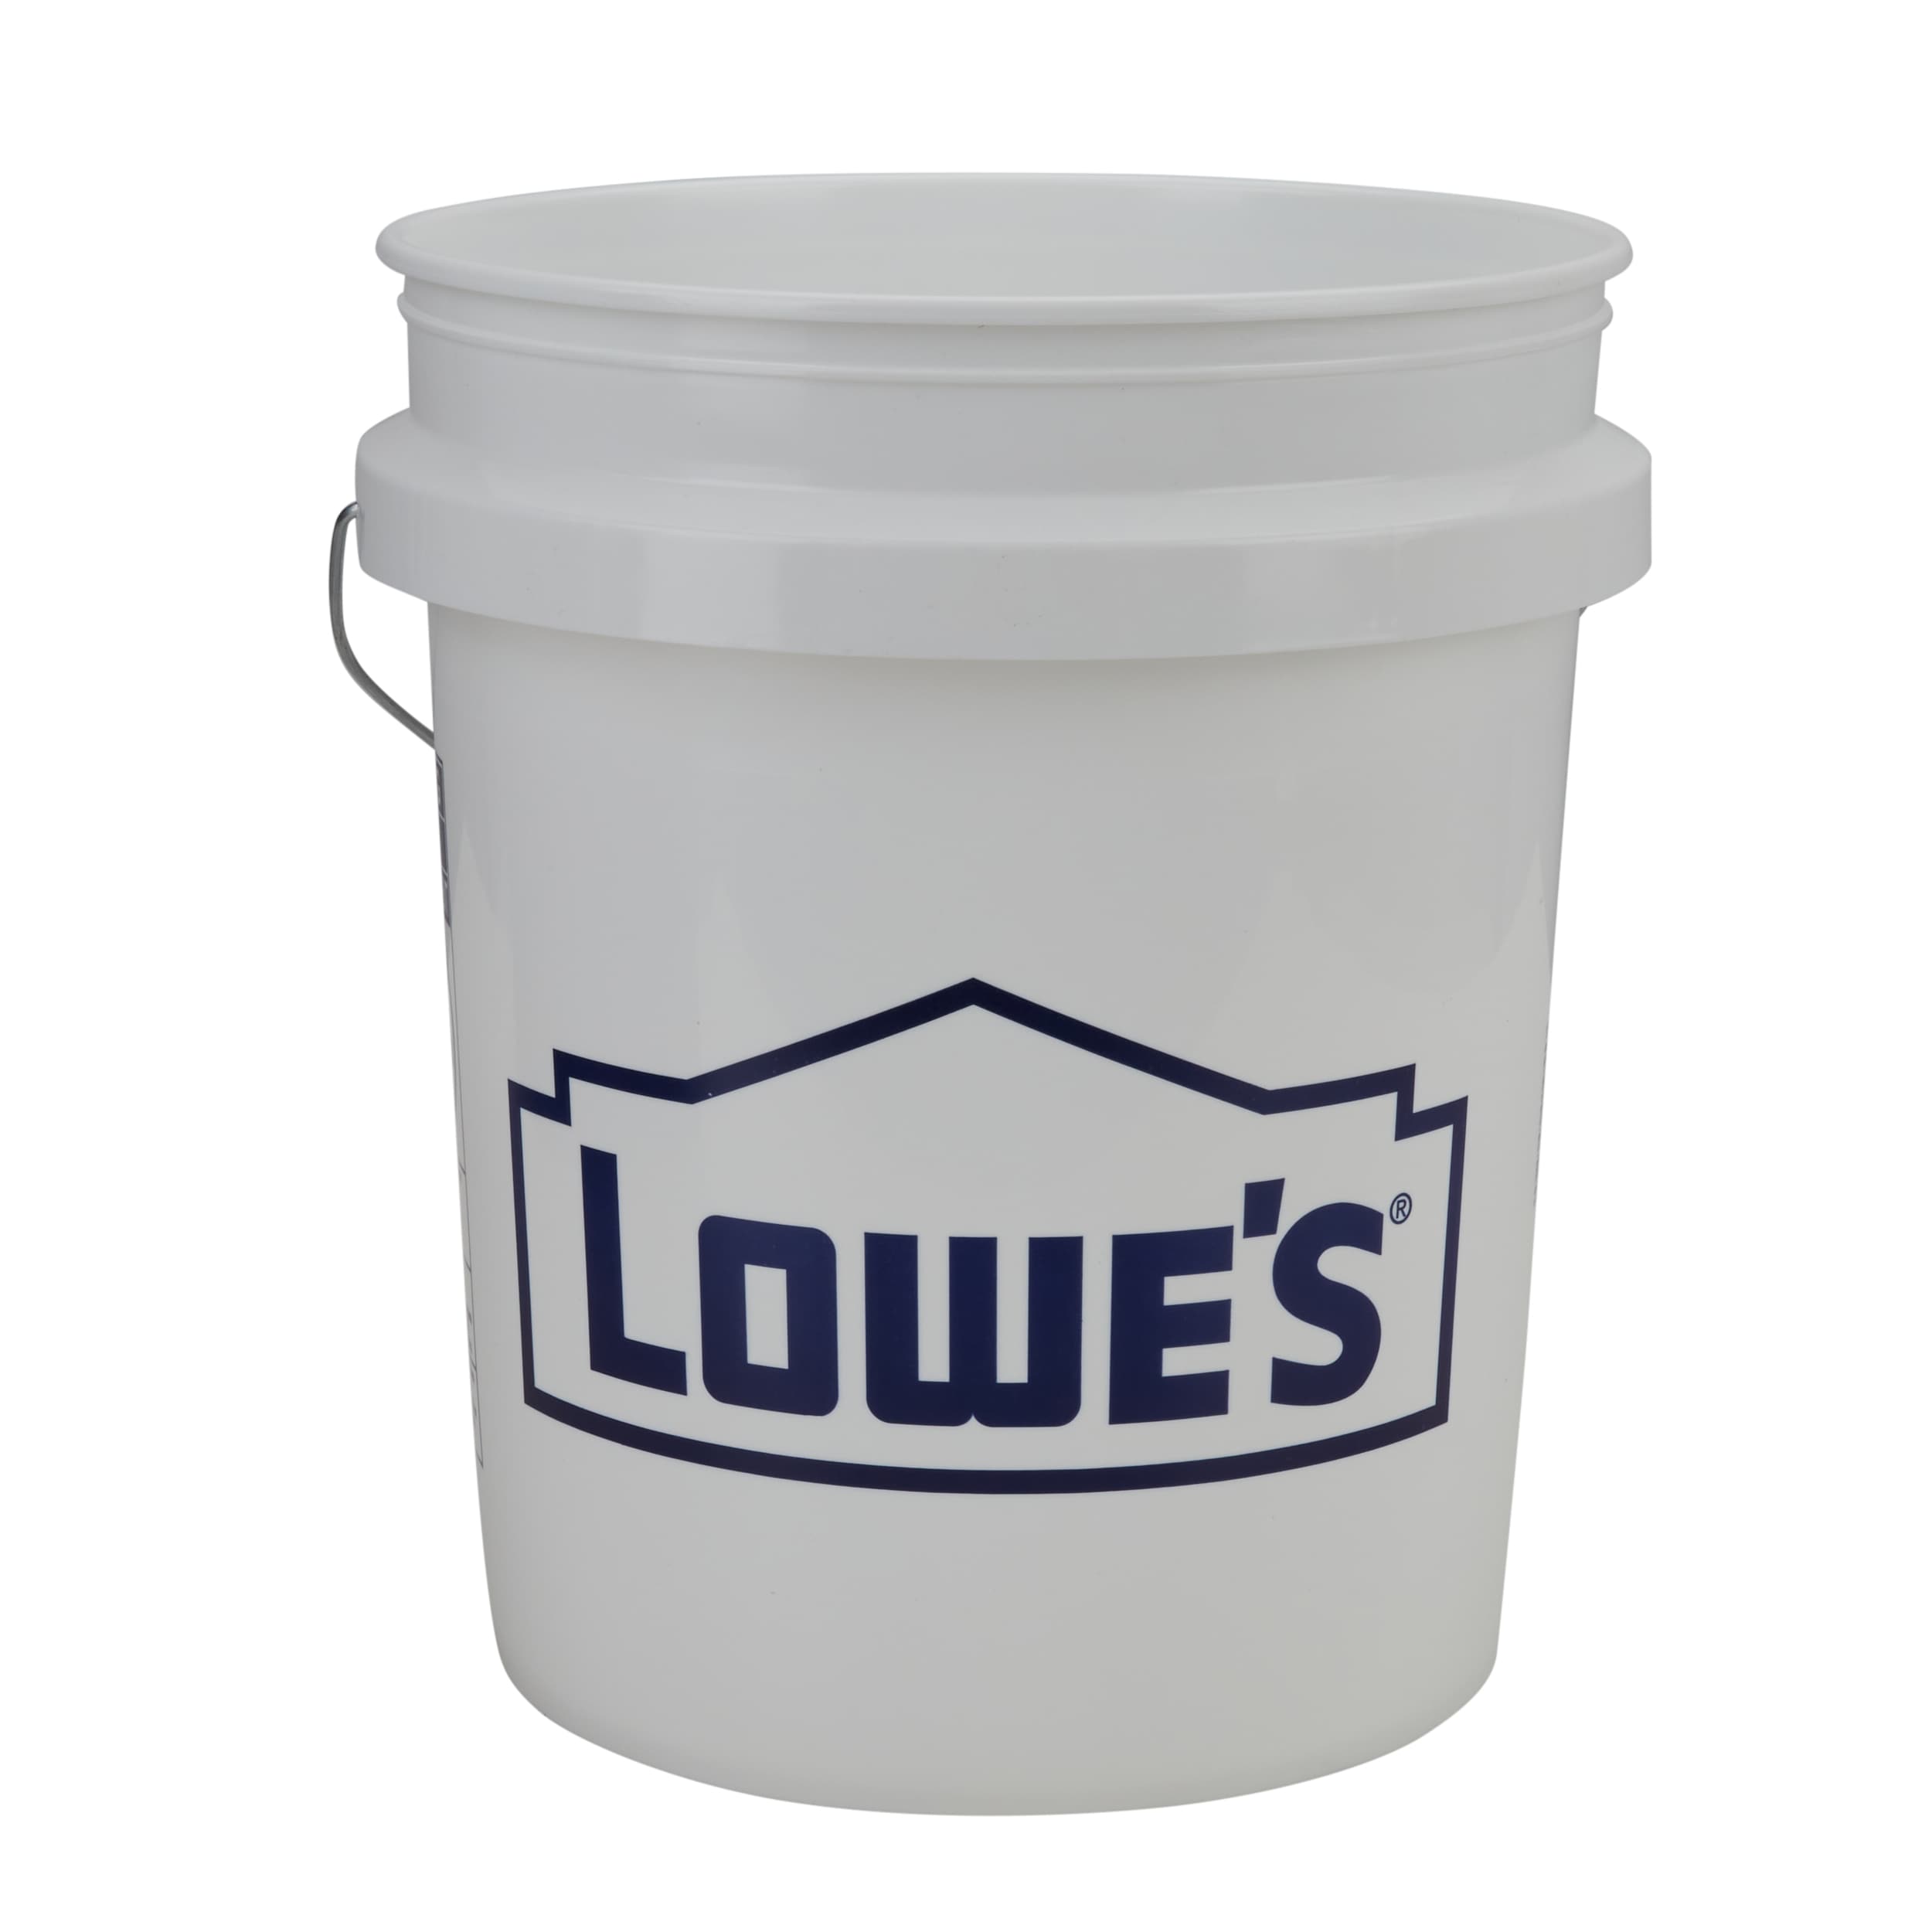 Great Road Farm and Garden - Big buckets, small buckets, plastic buckets,  rubber buckets… if you need a bucket, we have it! #shopsmall #smallbusiness  #familyowned #littletonma